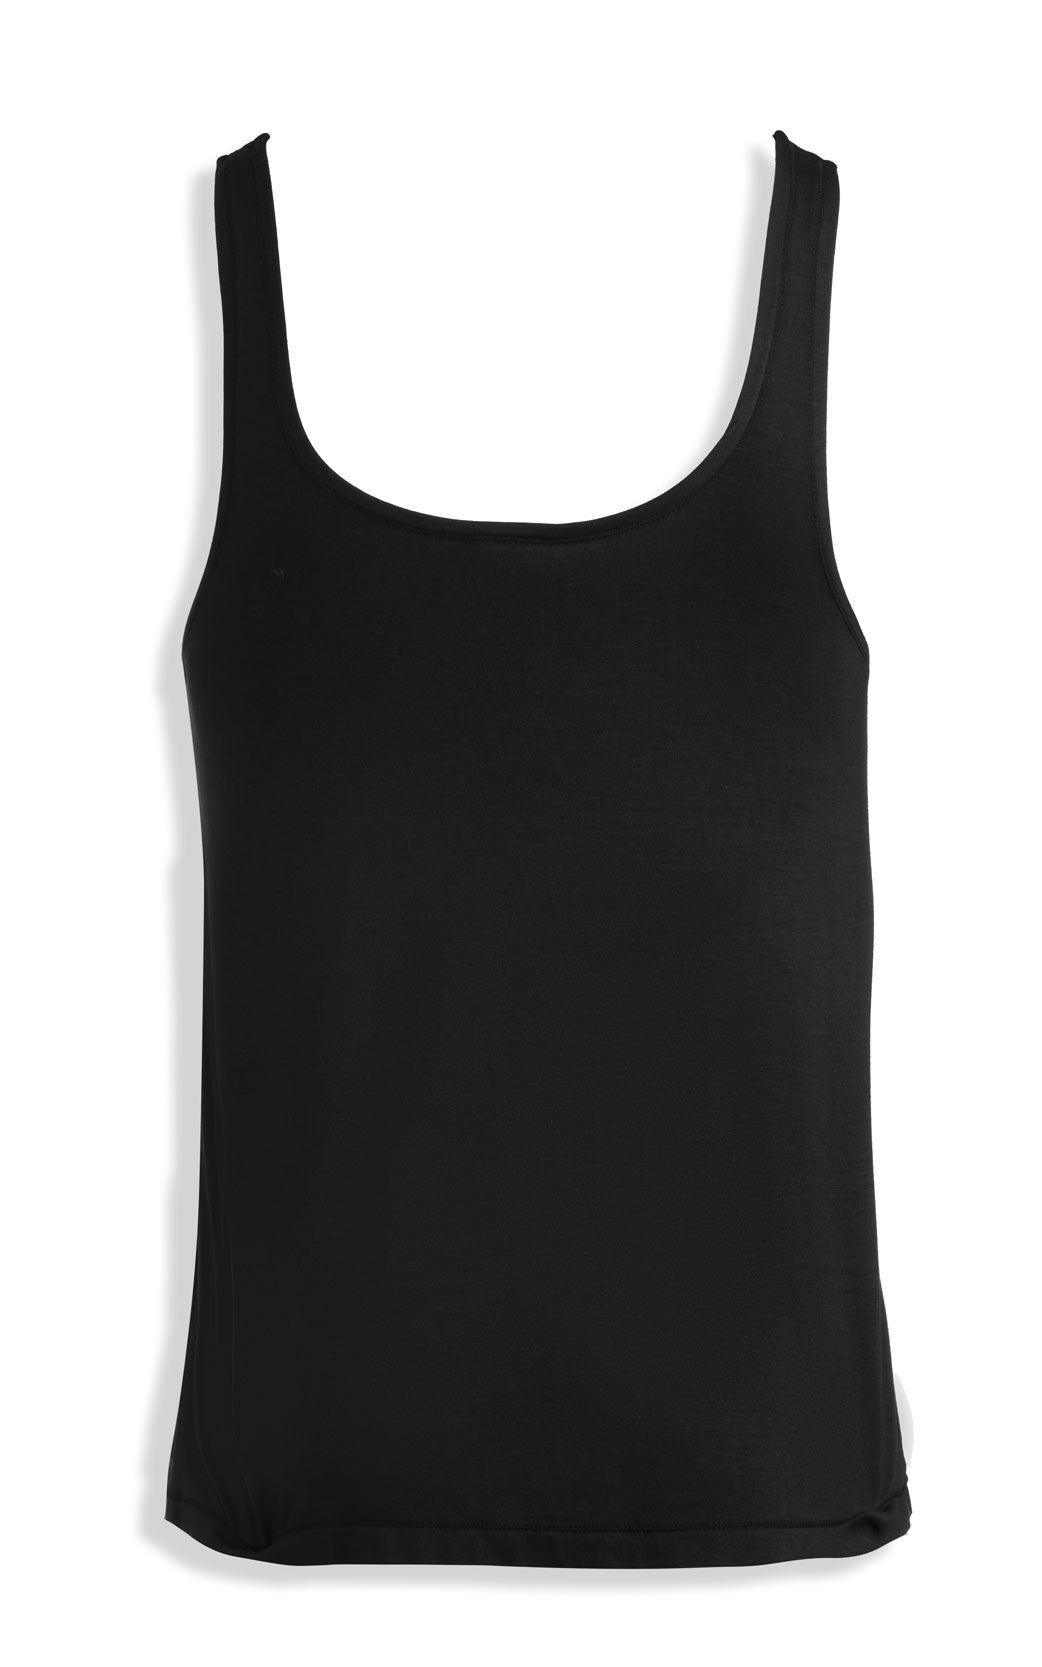 Women's Black Cropped Tank with straps